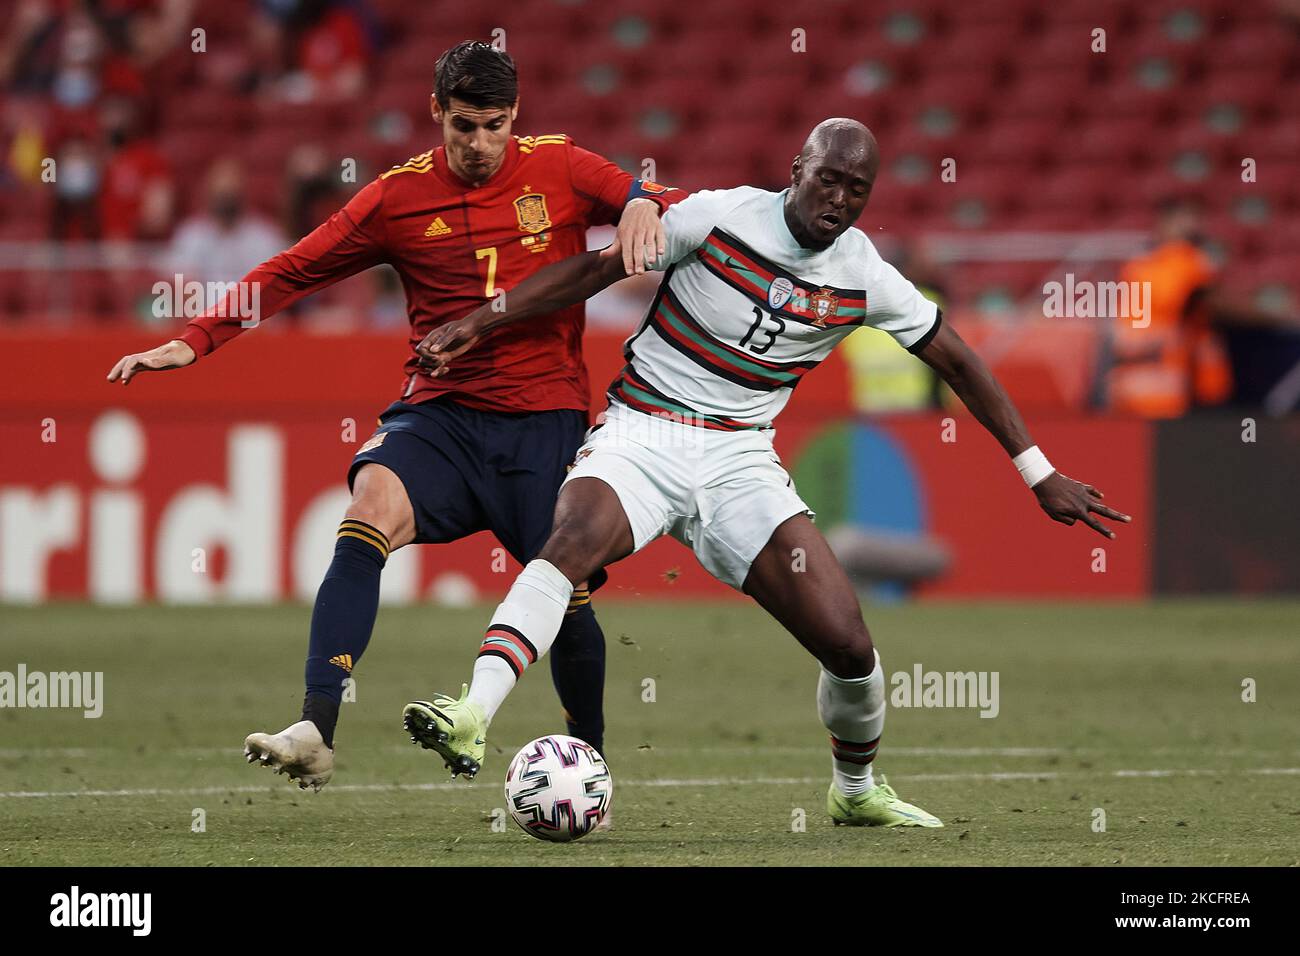 Danilo Pereira (Paris Saint-Germain) of Portugal and Alvaro Morata (Juventus FC) of Spain compete for the ball during the international friendly match between Spain and Portugal at Estadio Wanda Metropolitano on June 4, 2021 in Madrid, Spain. (Photo by Jose Breton/Pics Action/NurPhoto) Stock Photo